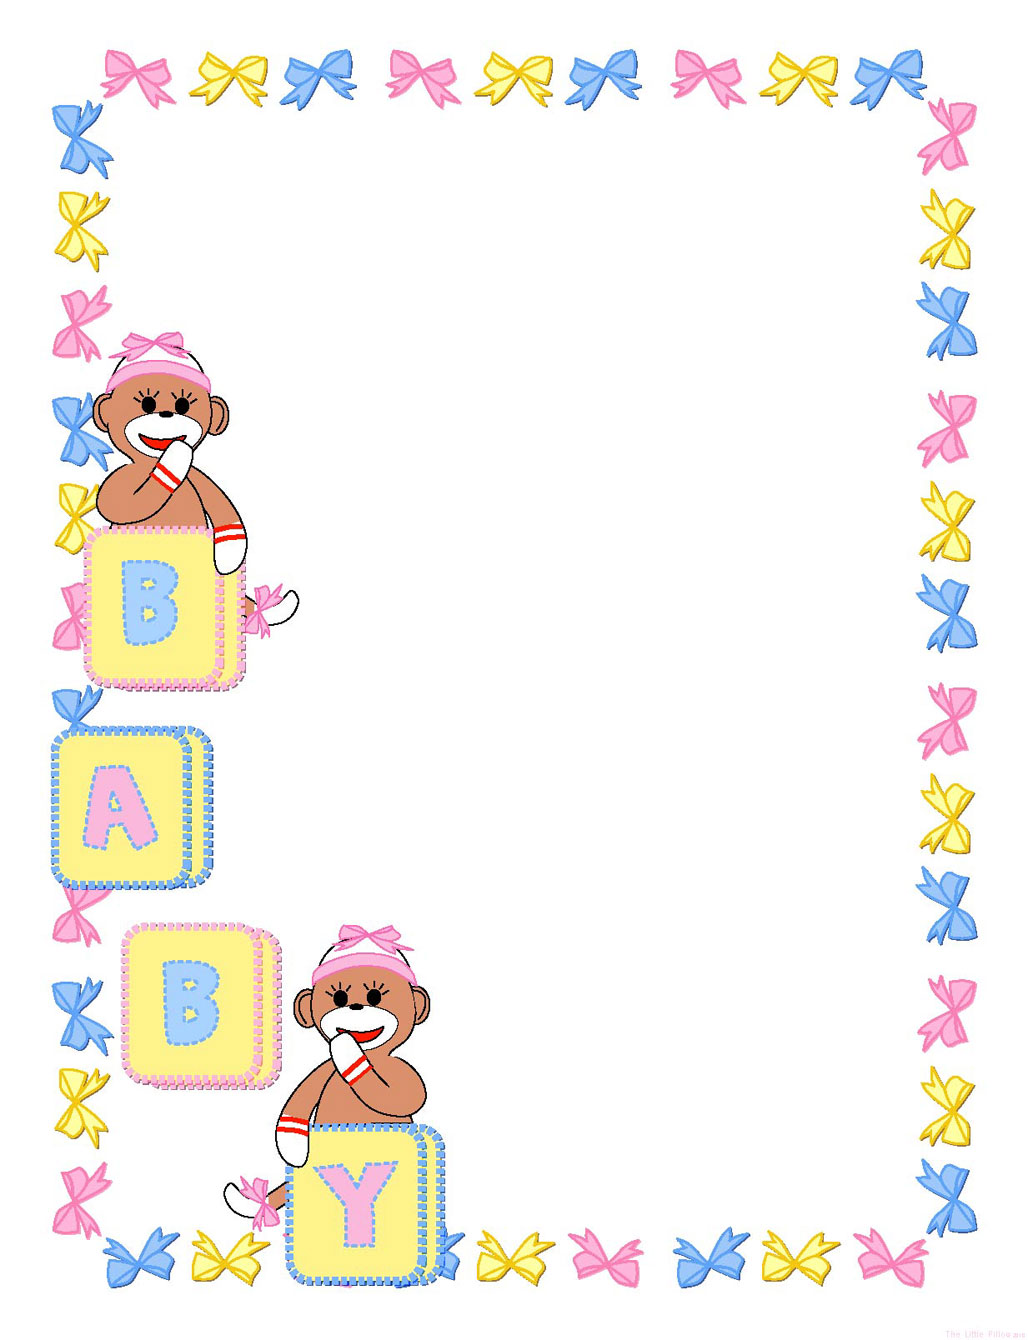 free-baby-border-png-download-free-baby-border-png-png-images-free-cliparts-on-clipart-library